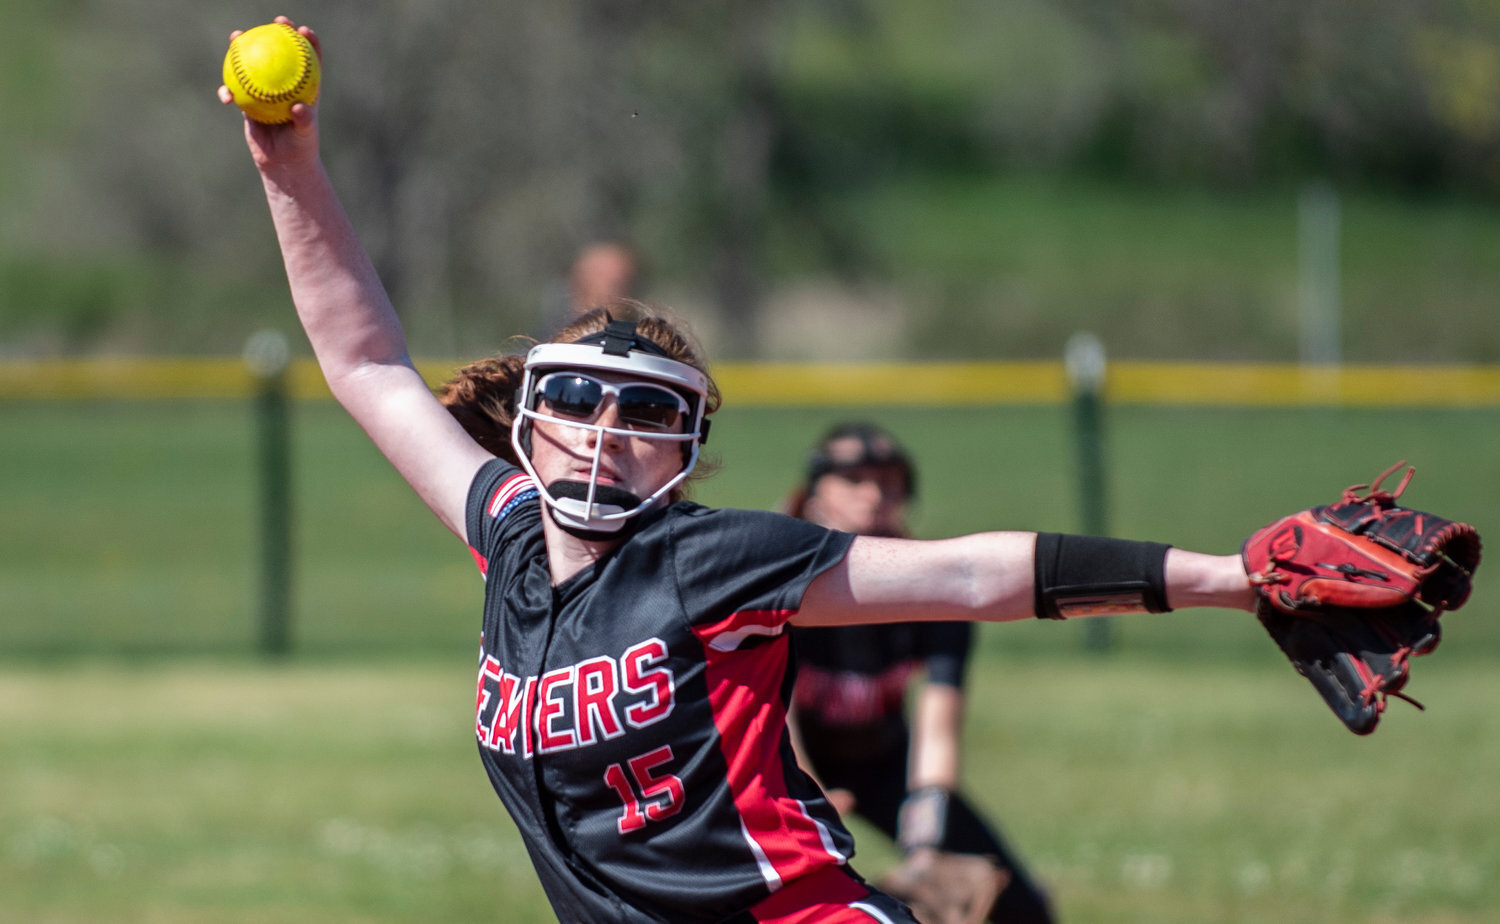 Tenino pitcher Emily Baxter winds up to deliver a pitch to an Elma batter.